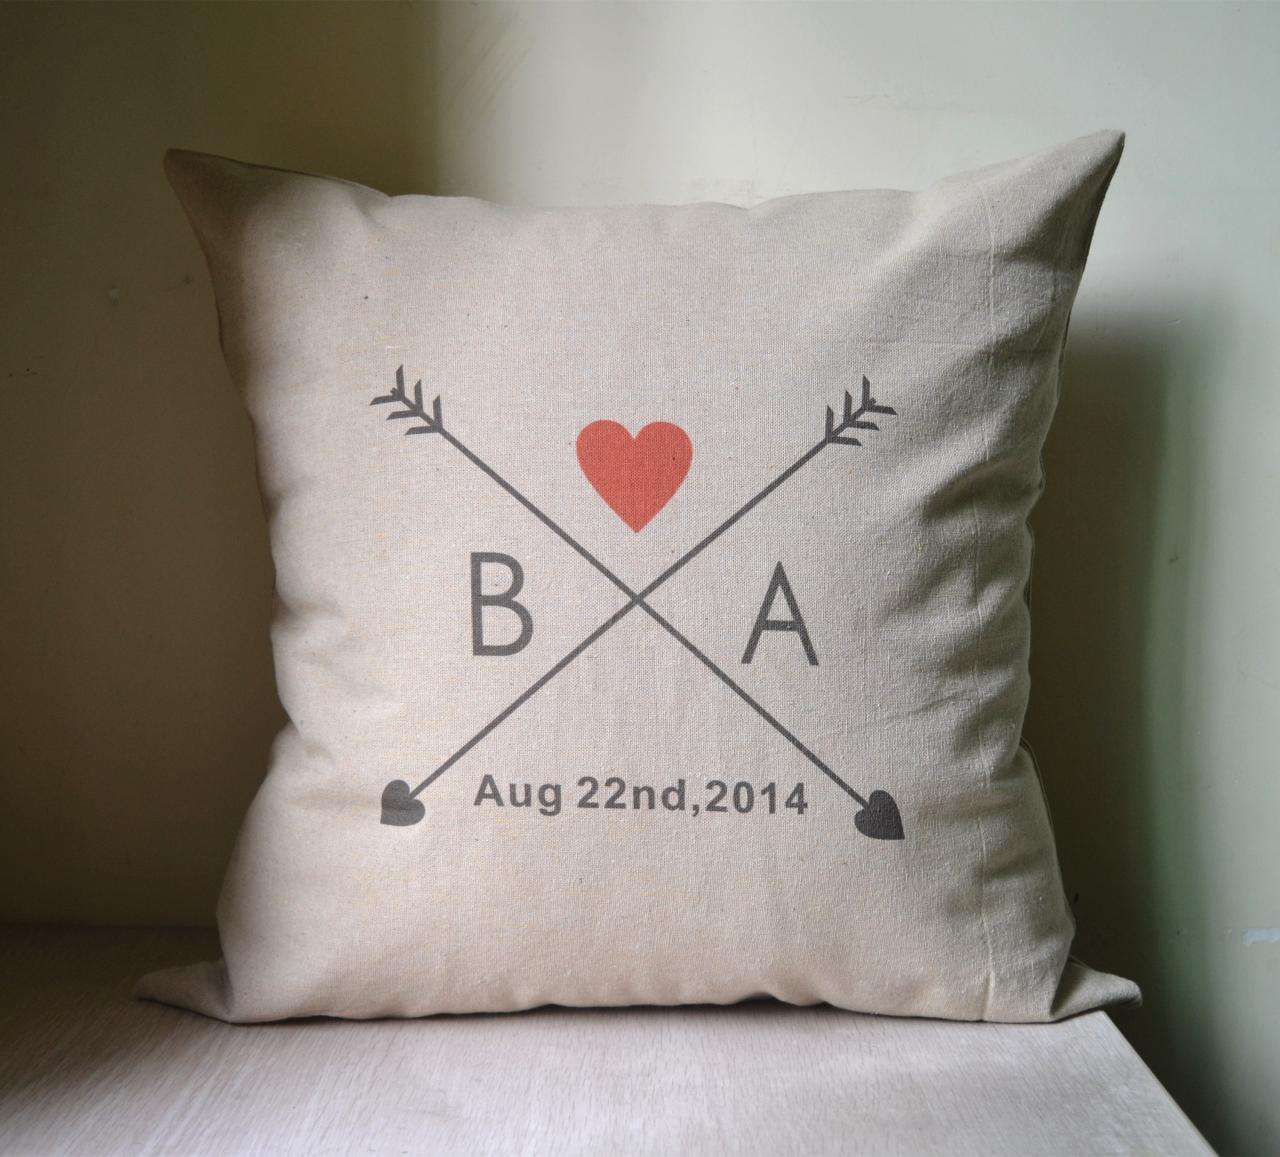 Love Arrow,couple Initial,personalized Pillow Cover,cushion Cover,monogrammed Pillow,anniversary Gift,bridal Shower Gift,wedding Gift